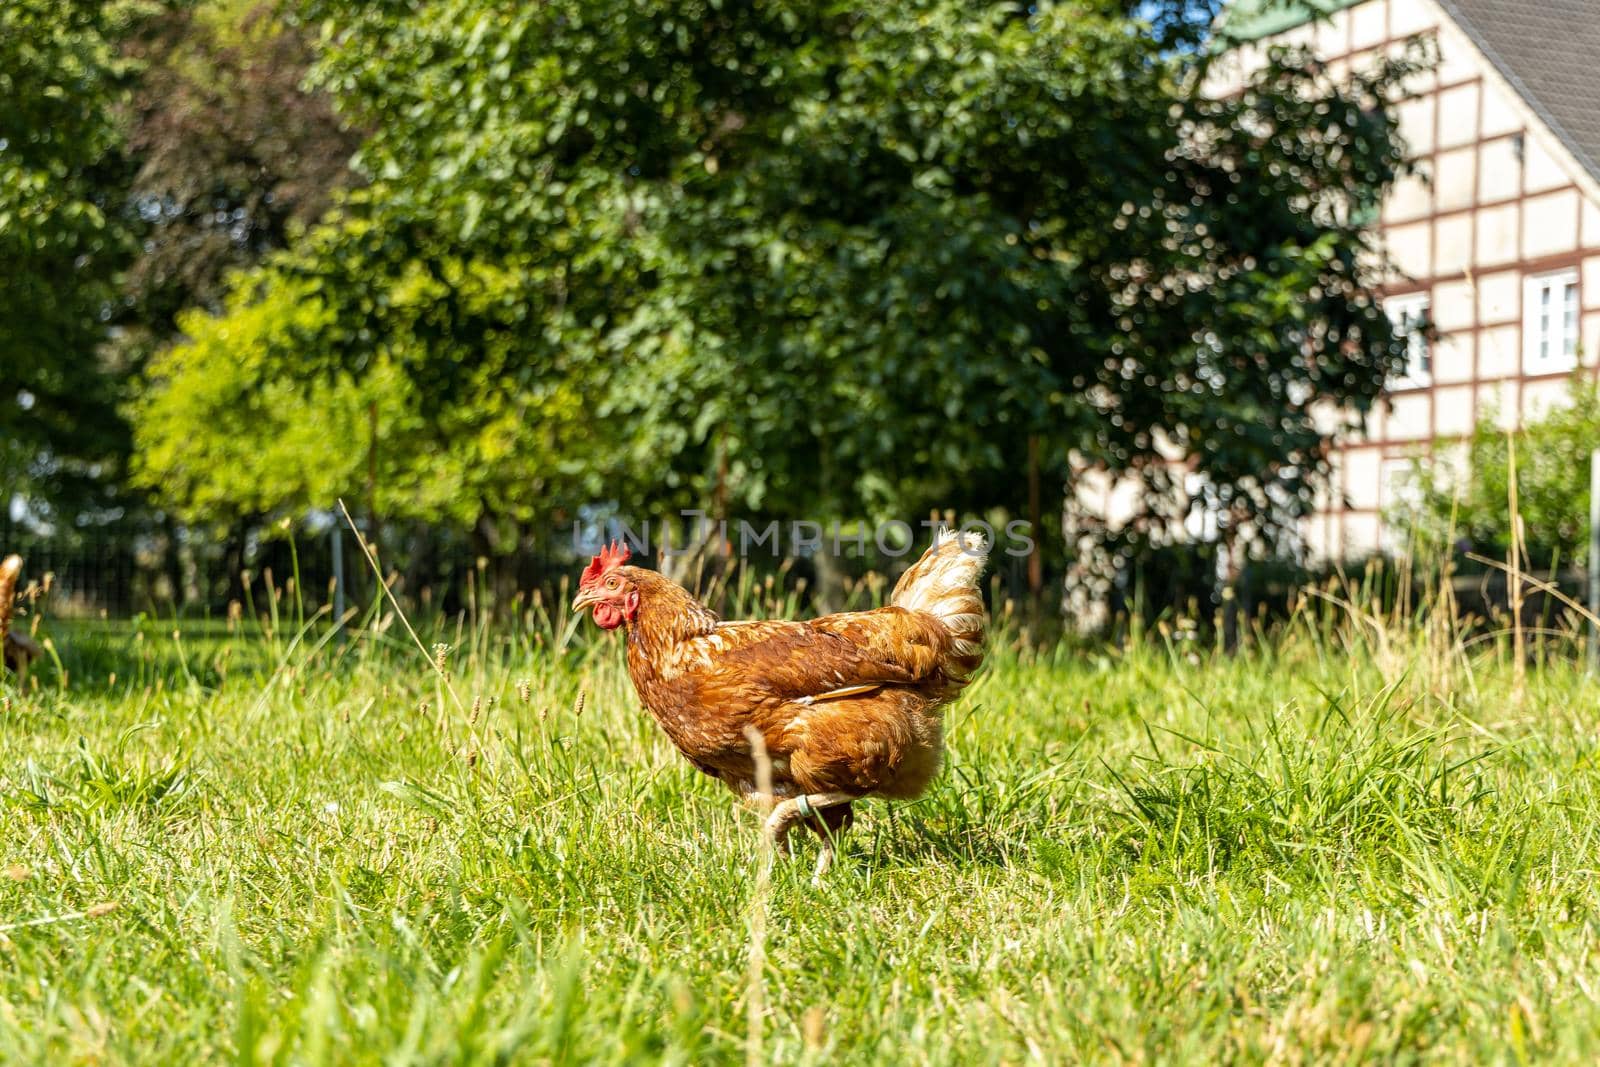 Free range organic chickens poultry in a country farm